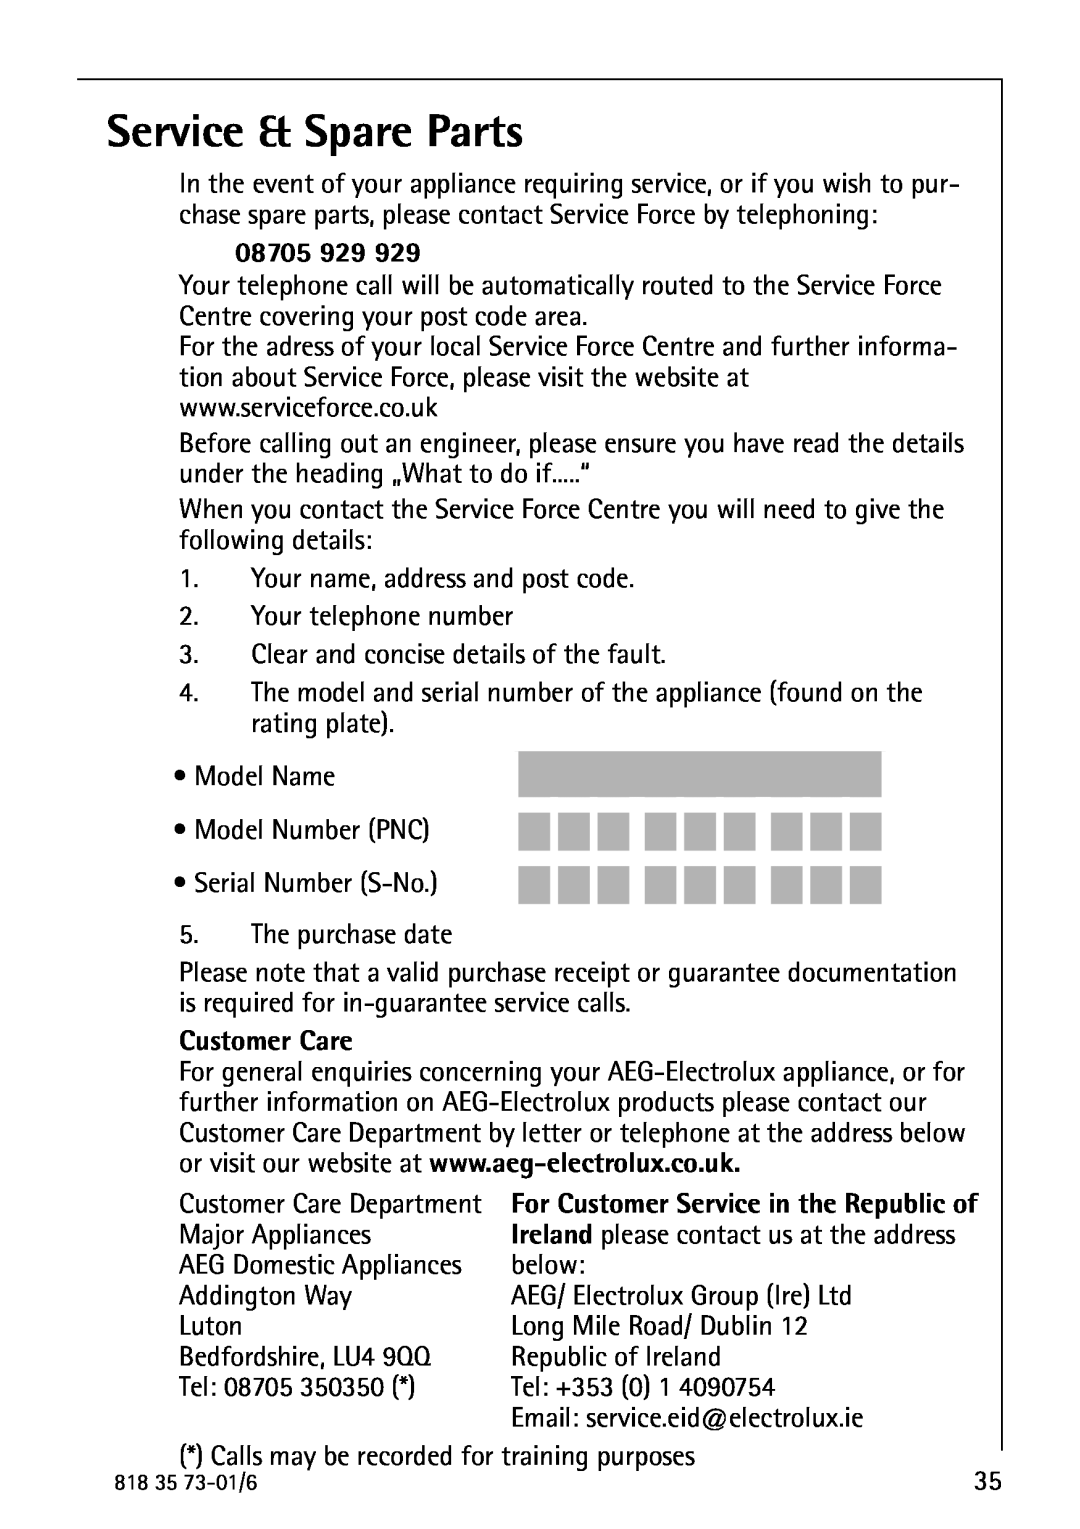 Electrolux SANTO 72340 KA operating instructions Service & Spare Parts, 08705 929, Customer Care 